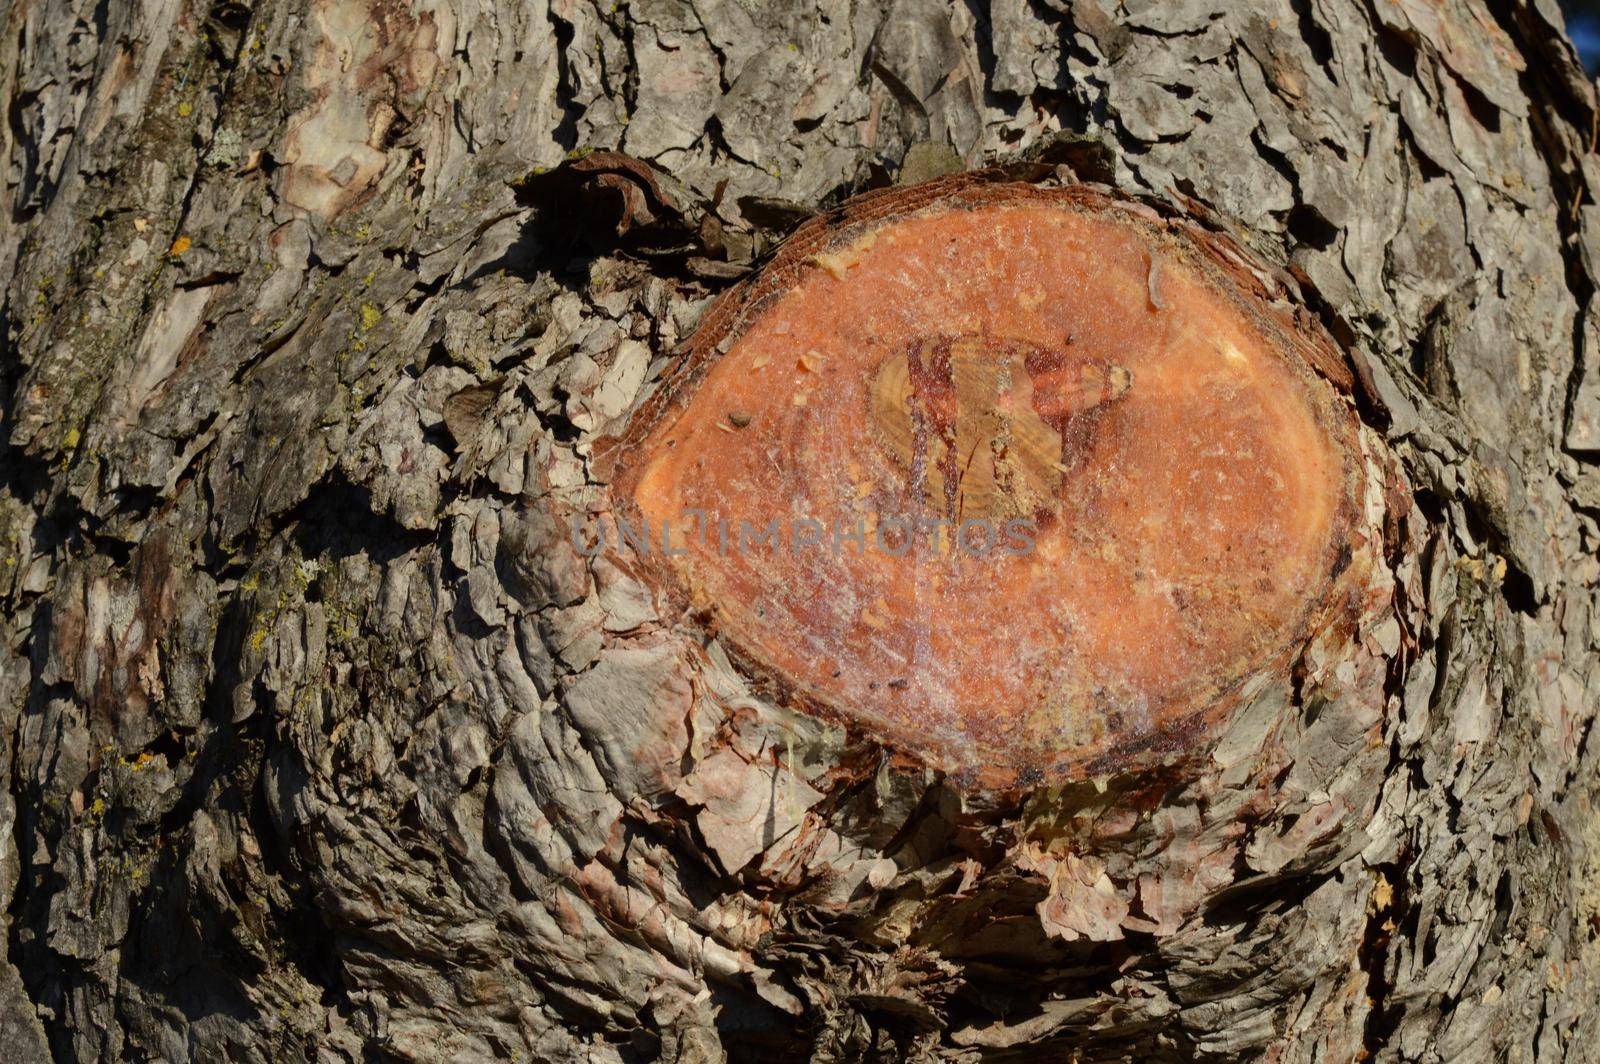 A closeup of a cut tree branch where pine resin is being secreted from the area.